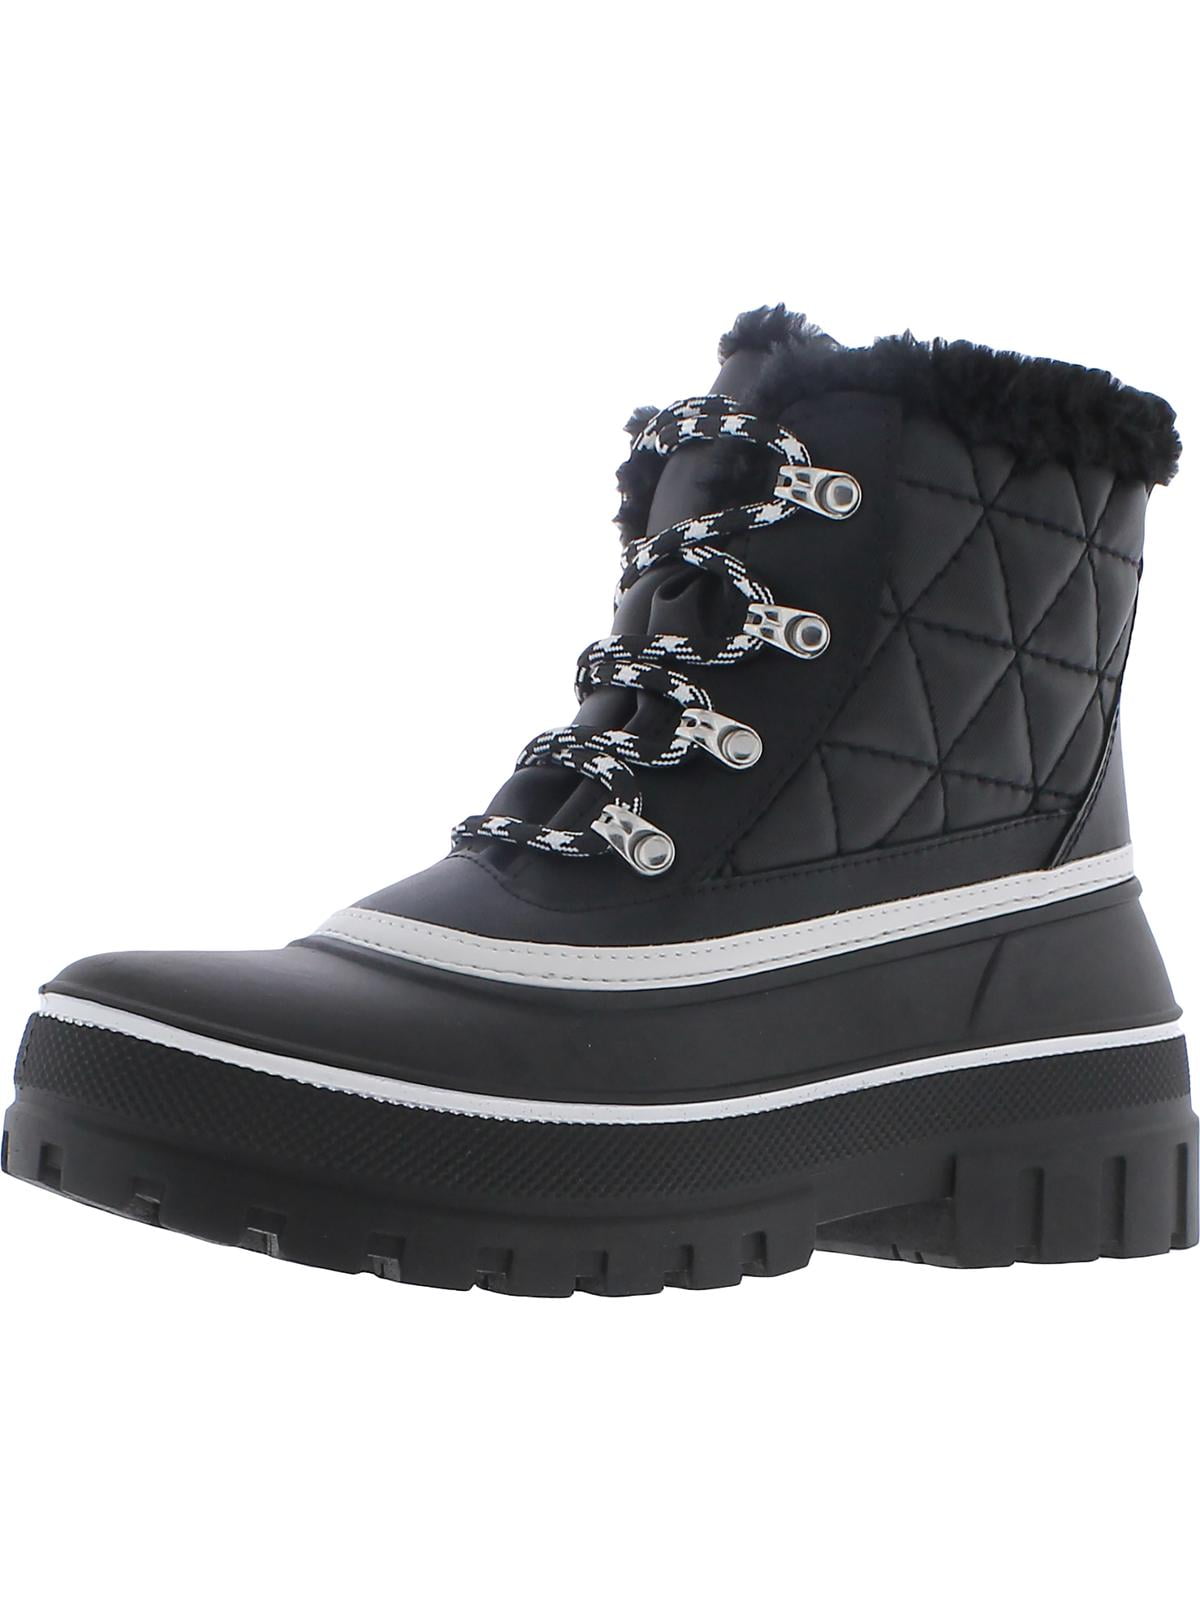 Steve Madden Womens Billow Leather Faux Fur Snow Winter Boots Shoes BHFO 4211 